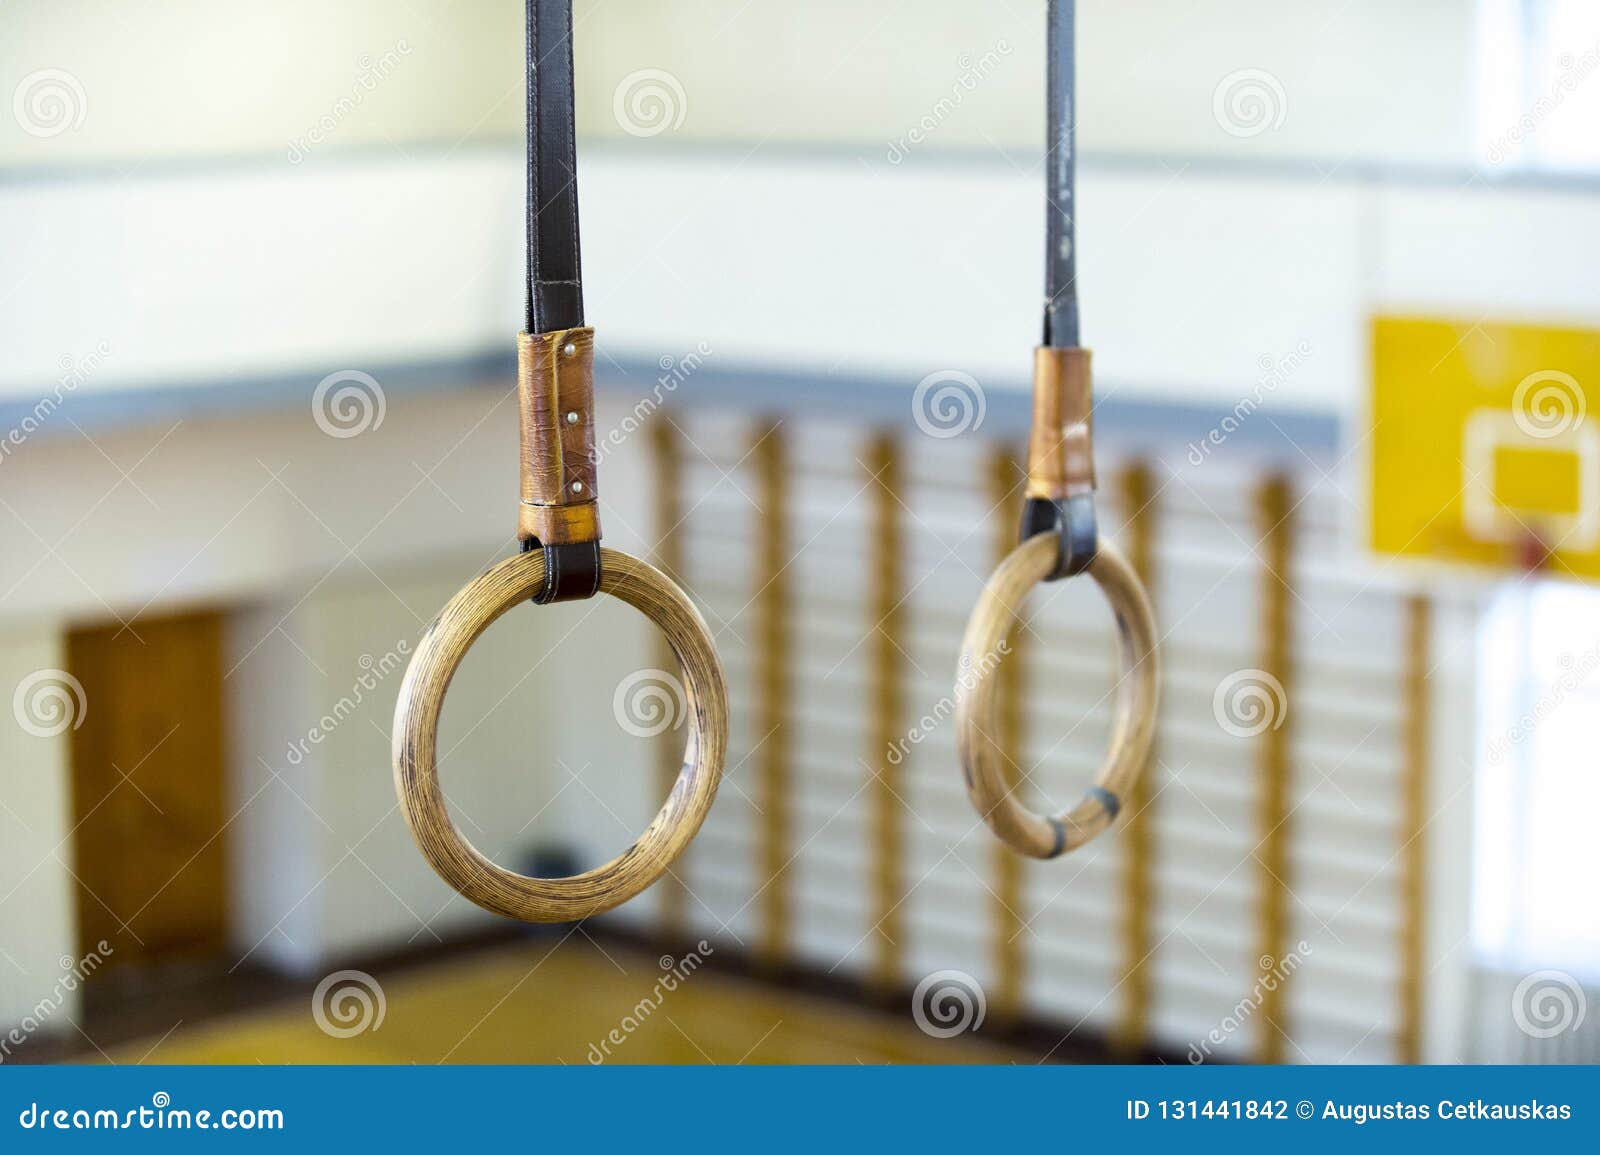 Teenage Caucasian boy hanging on gymnastic rings at the playground: Royalty  Free #73375266